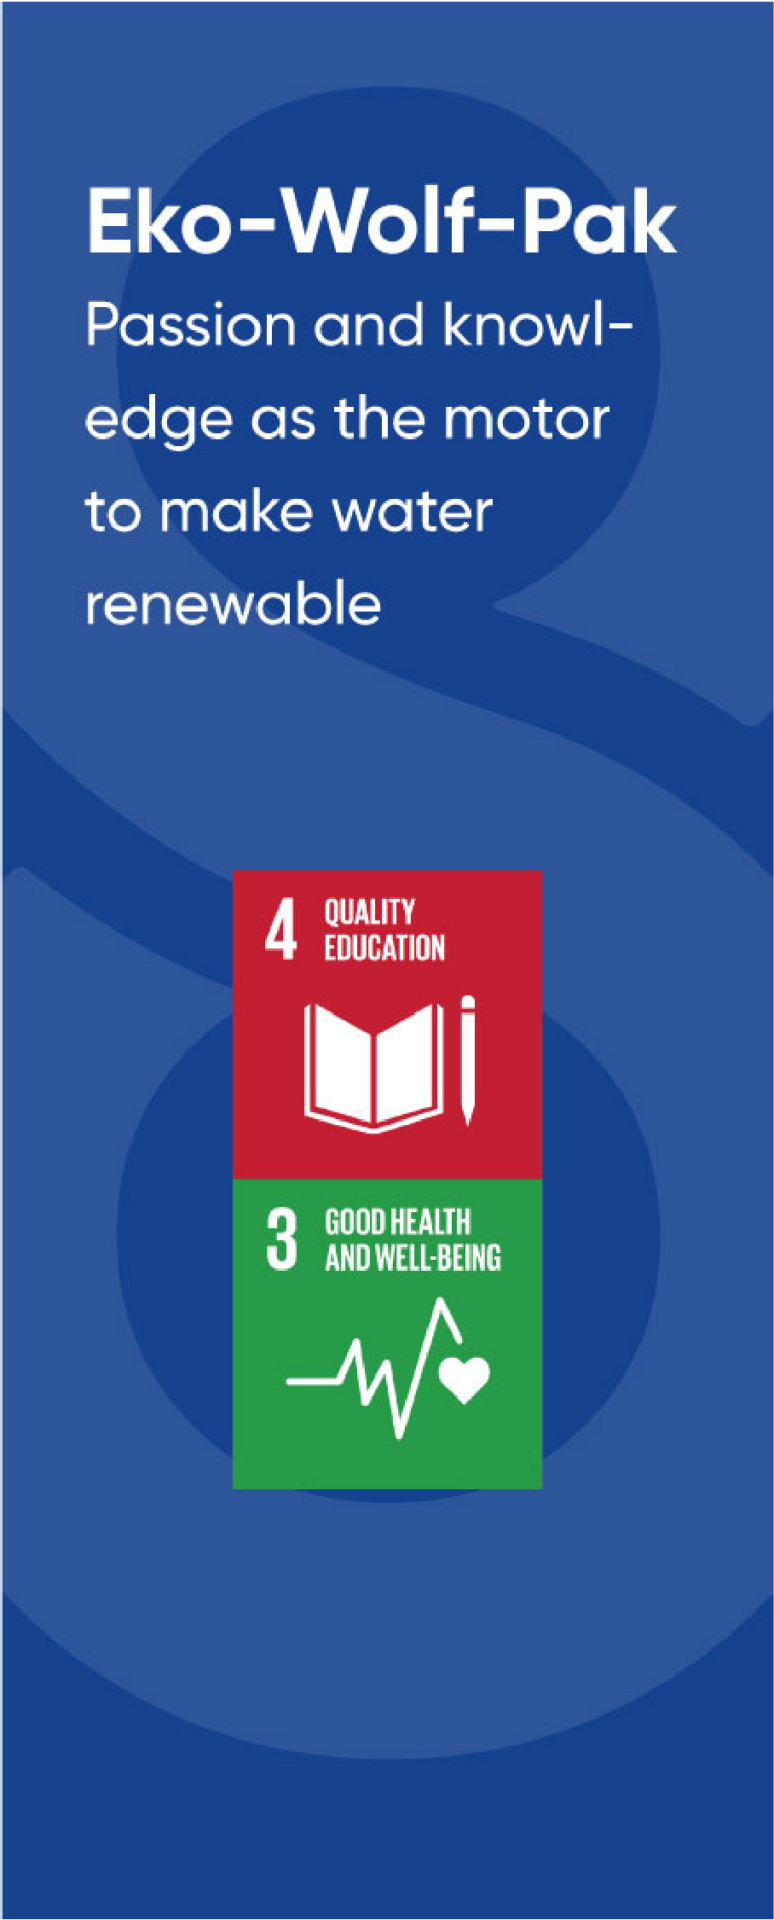 Symbols of some sustainability pillars: Quality education, Good health and well-being.